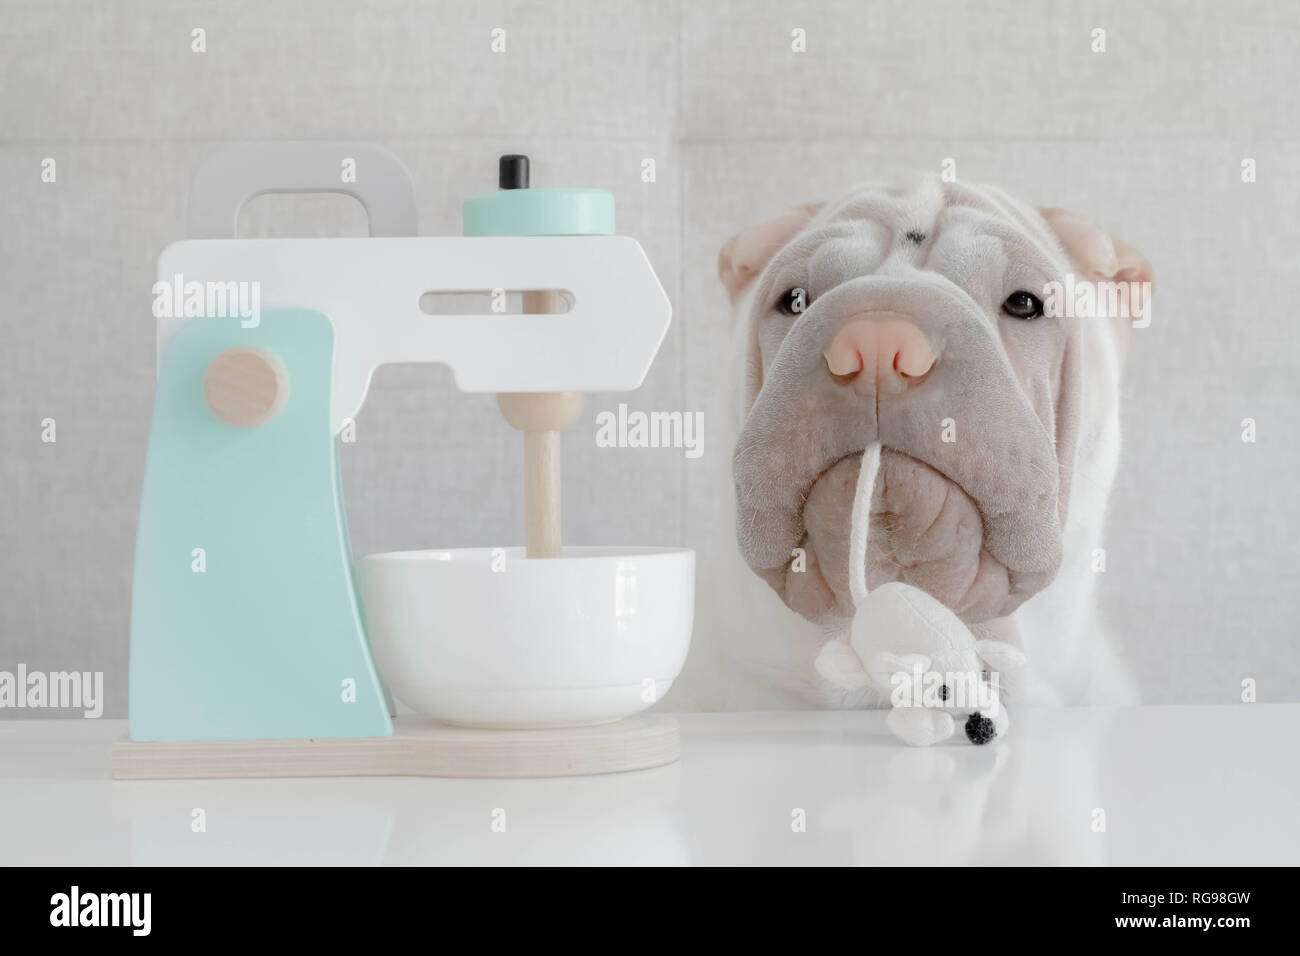 Shar pei dog with a mouse in his mouth sitting next to a toy food mixer Stock Photo